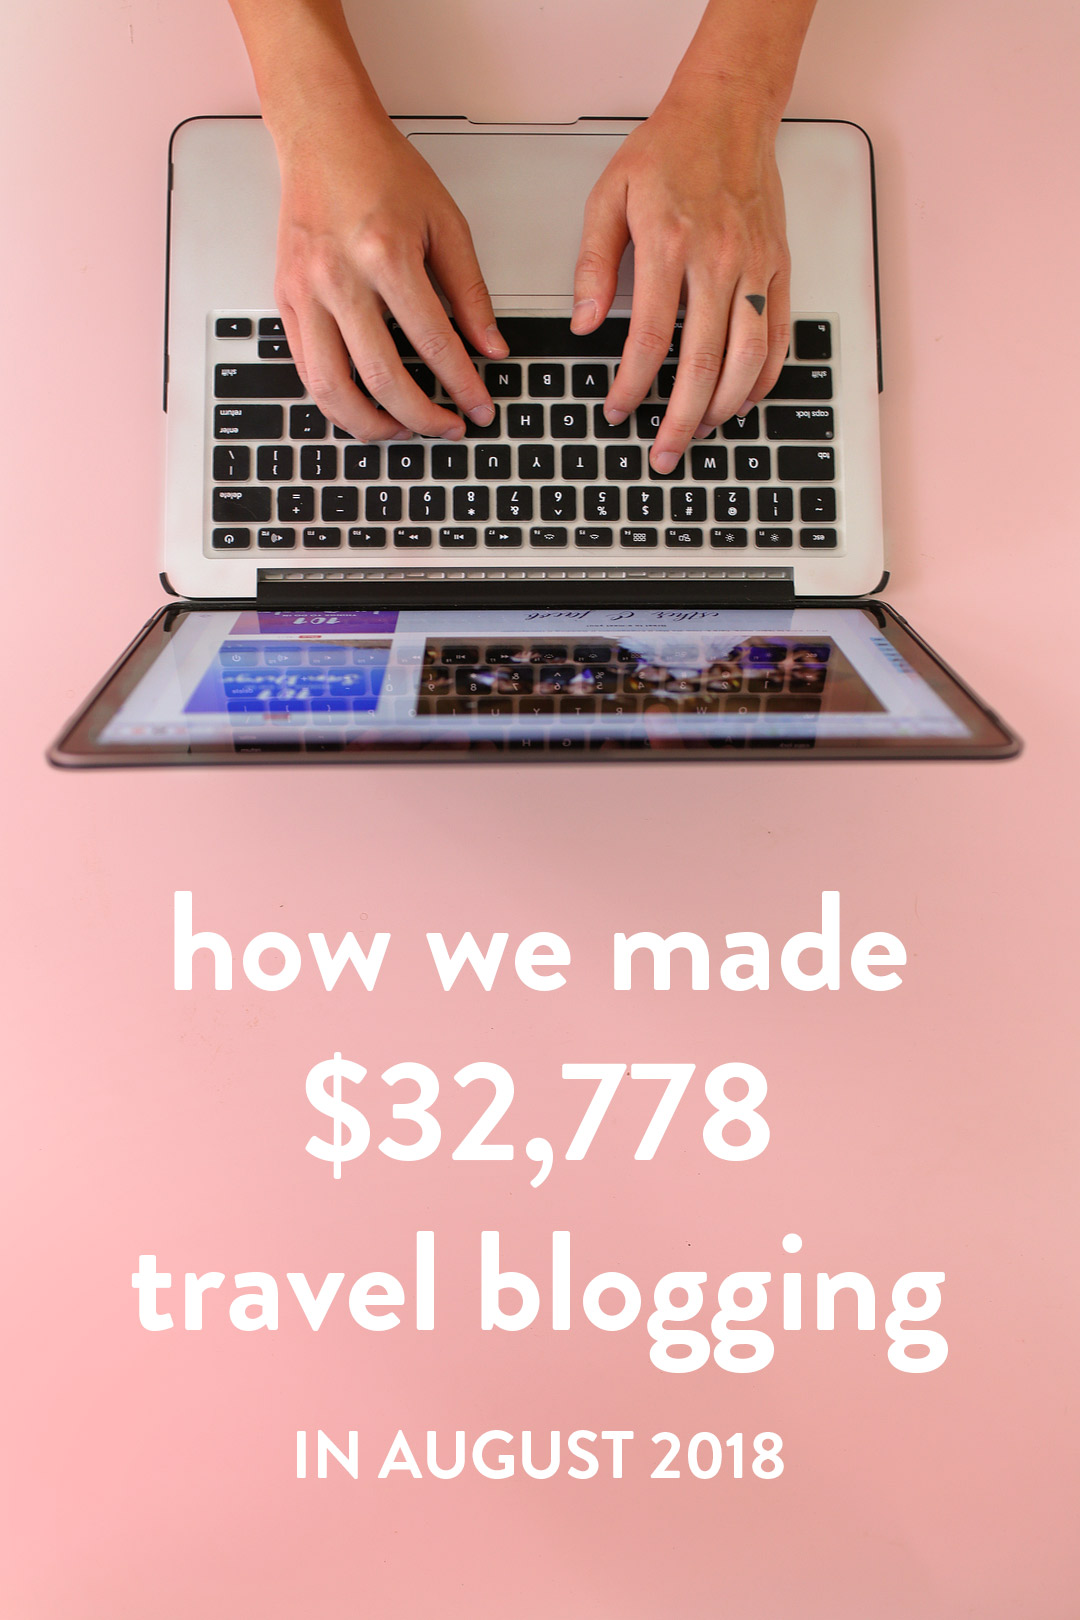 How We Made 32K+ in One Month - Our Blog Income Reports // Local Adventurer #localadventurer #travelblogger #blogincome #blogger #travelblog #blog #problogger